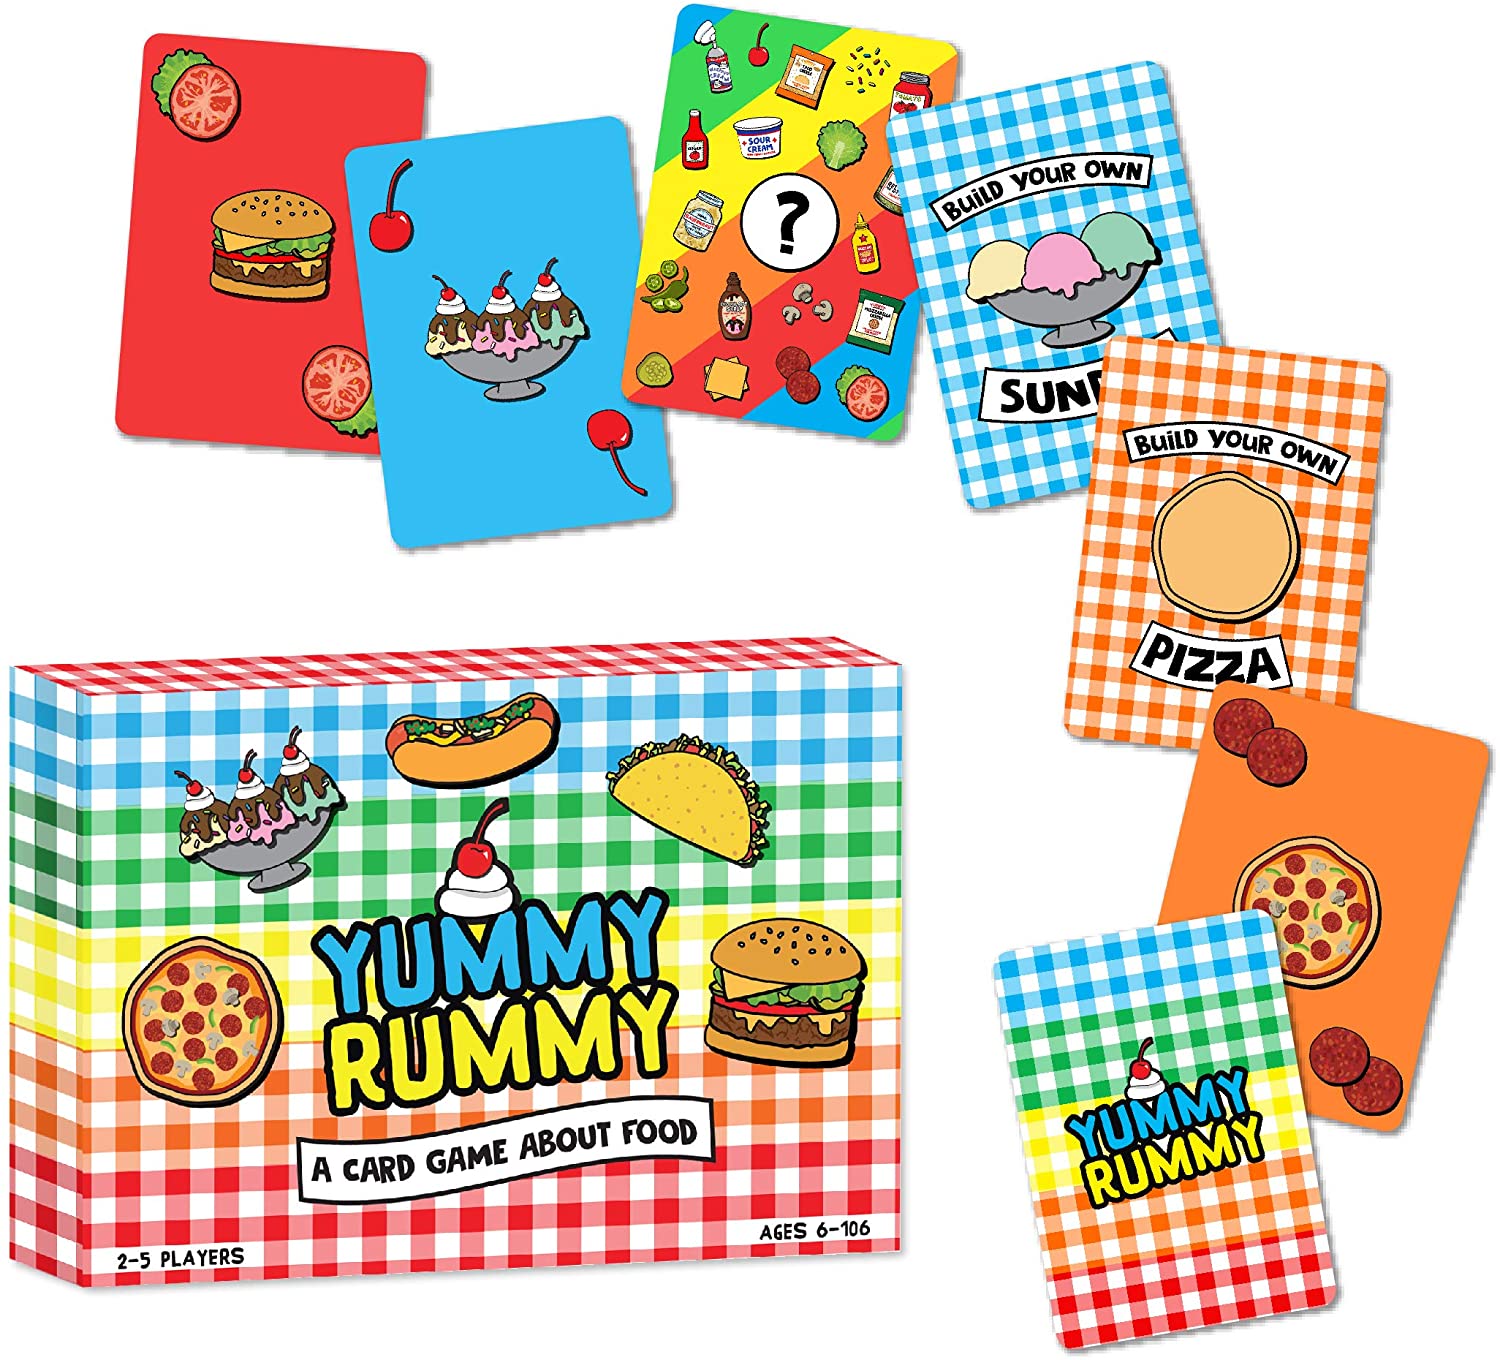 Yummy Rummy Card Game  Make Your Own Card Game – Dani Kates Designs